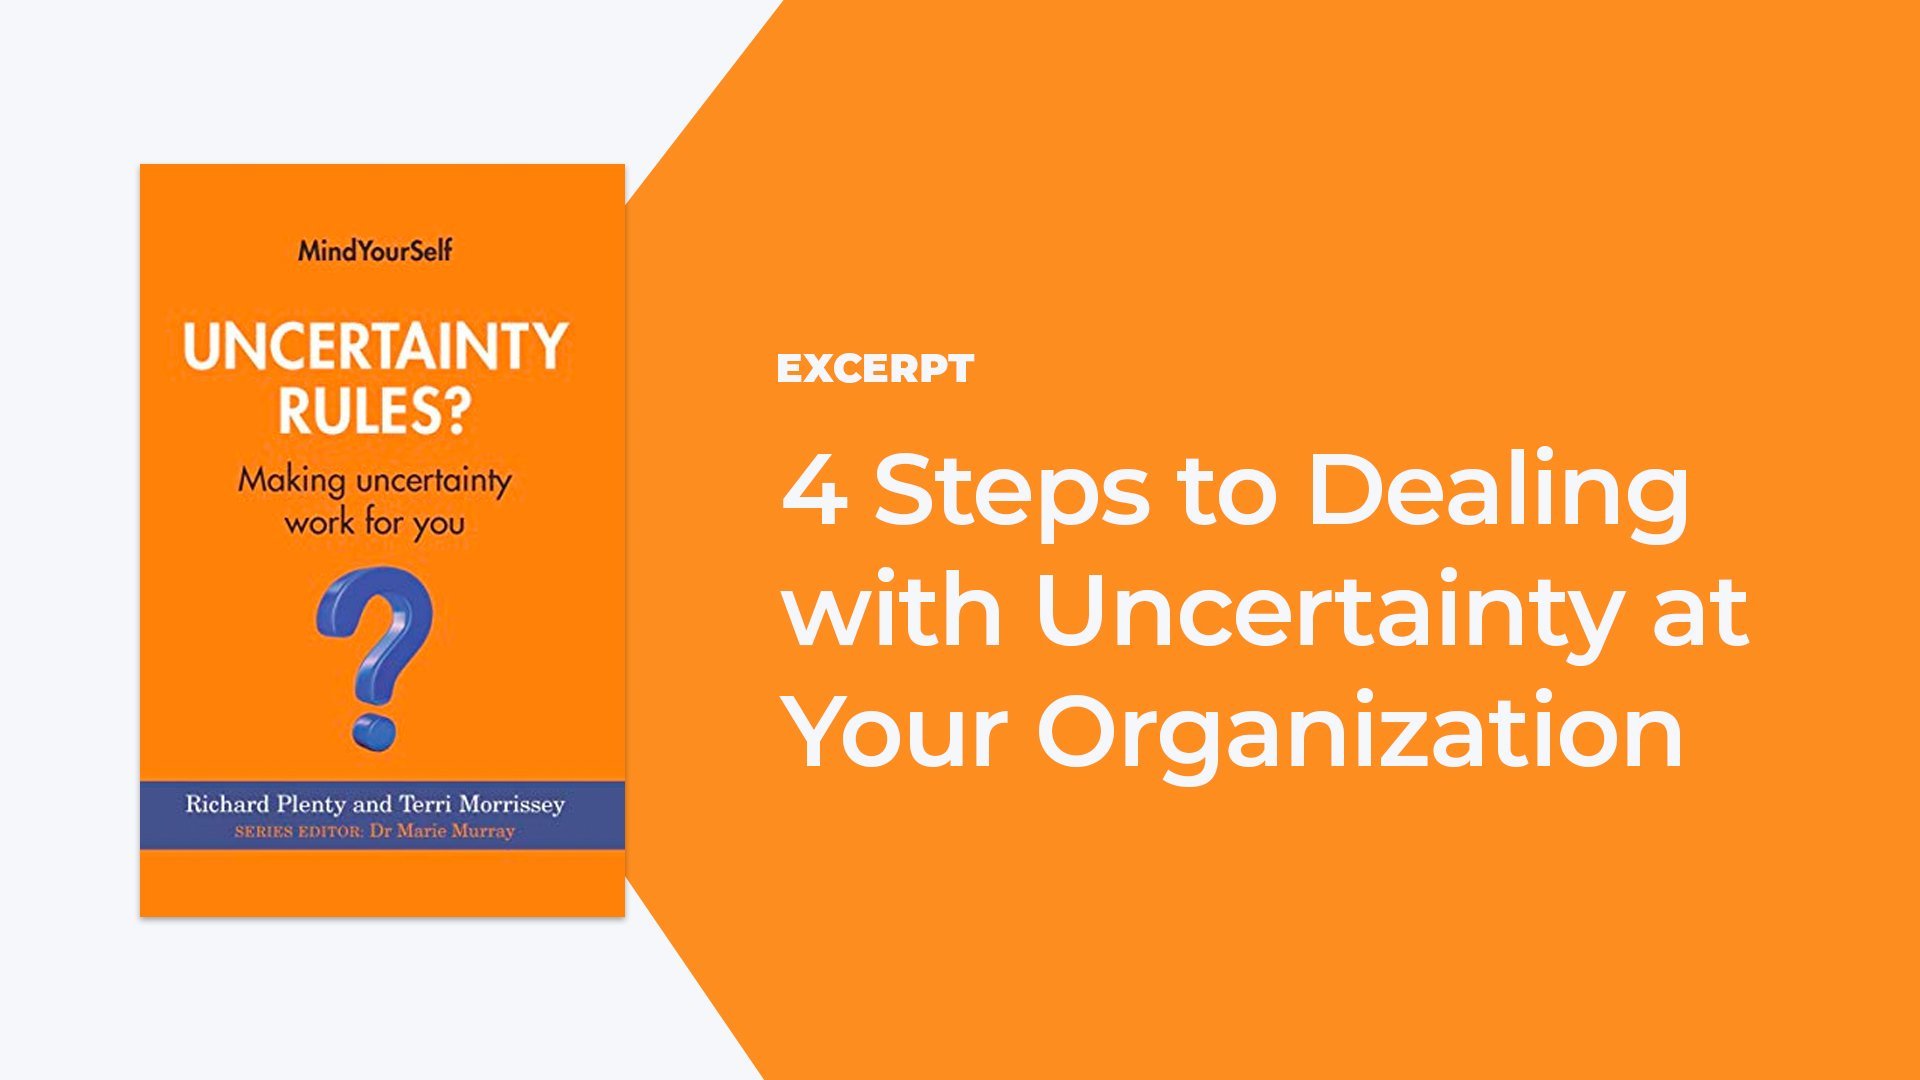 4 Steps to Dealing with Uncertainty at Your Organization